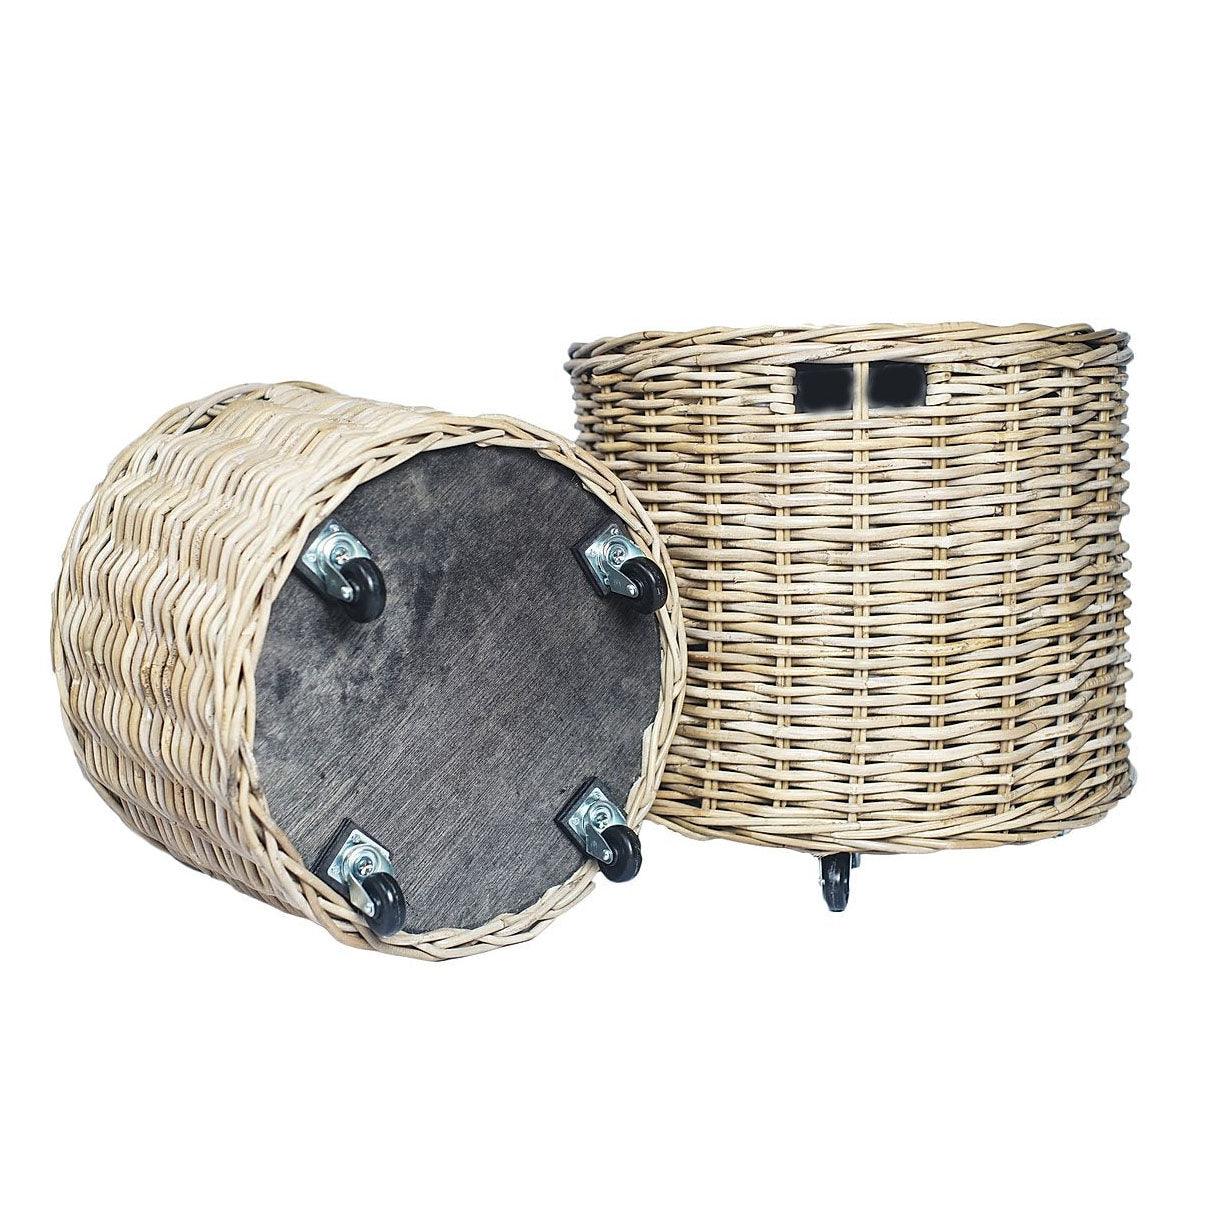 ❤️ Shop Round Baskets on Wheels by Rose St Trading Co